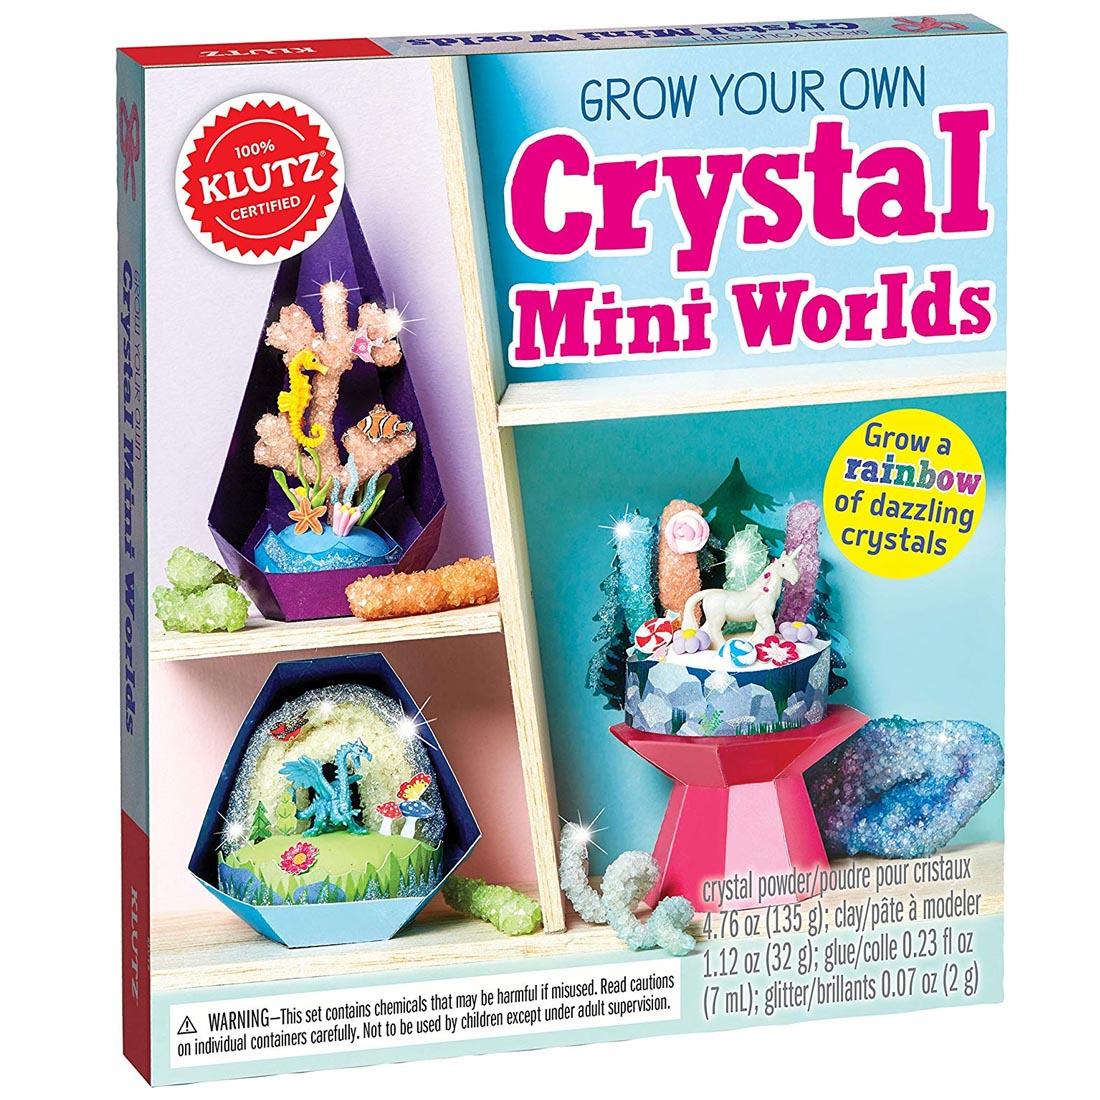 Grow-Your-Own Crystal Mini Worlds package shows examples of an undersea scene and magical settings with a unicorn and dragon